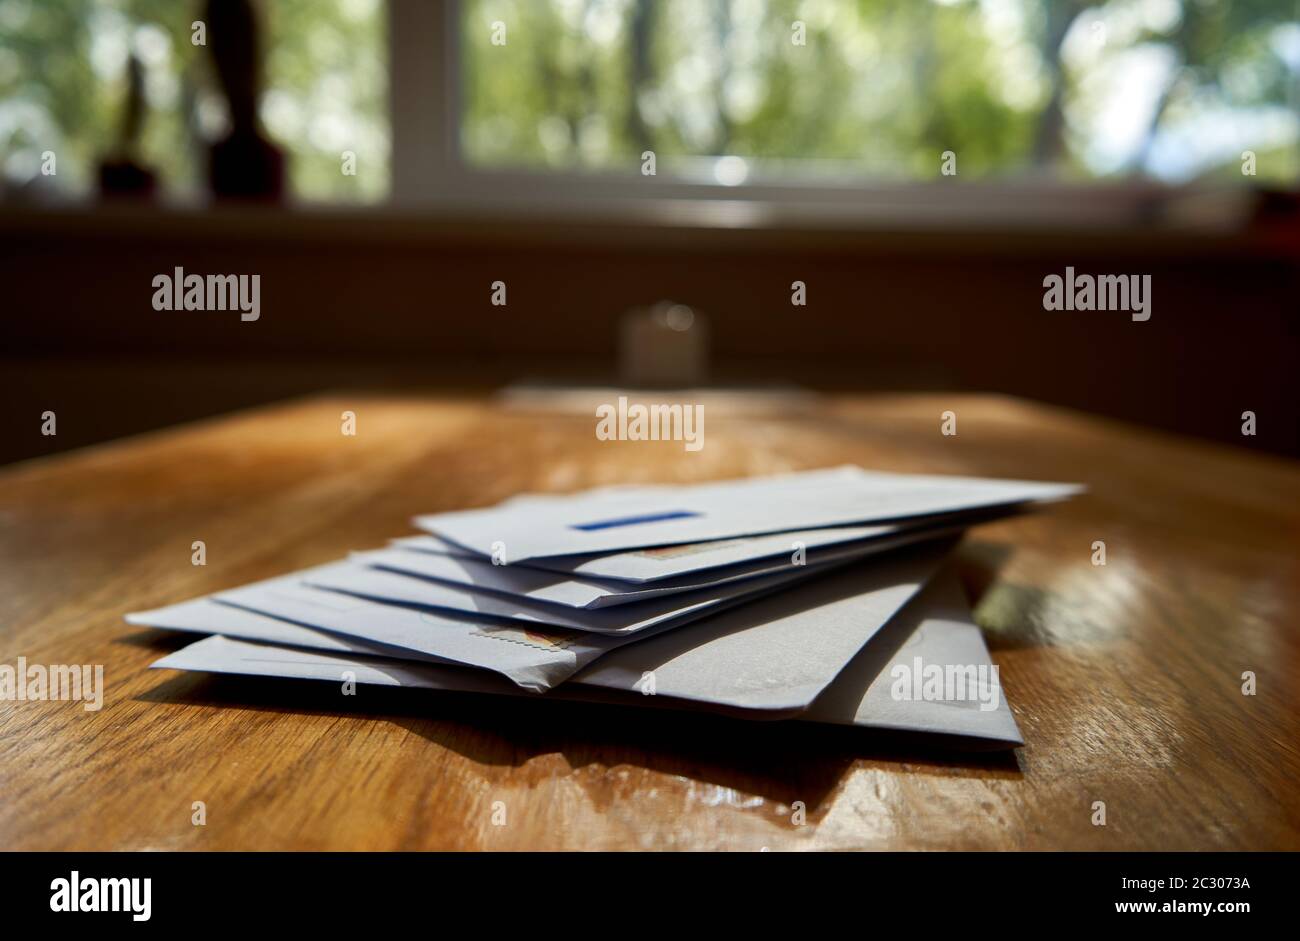 Envelopes on the wooden table during sunny day Stock Photo